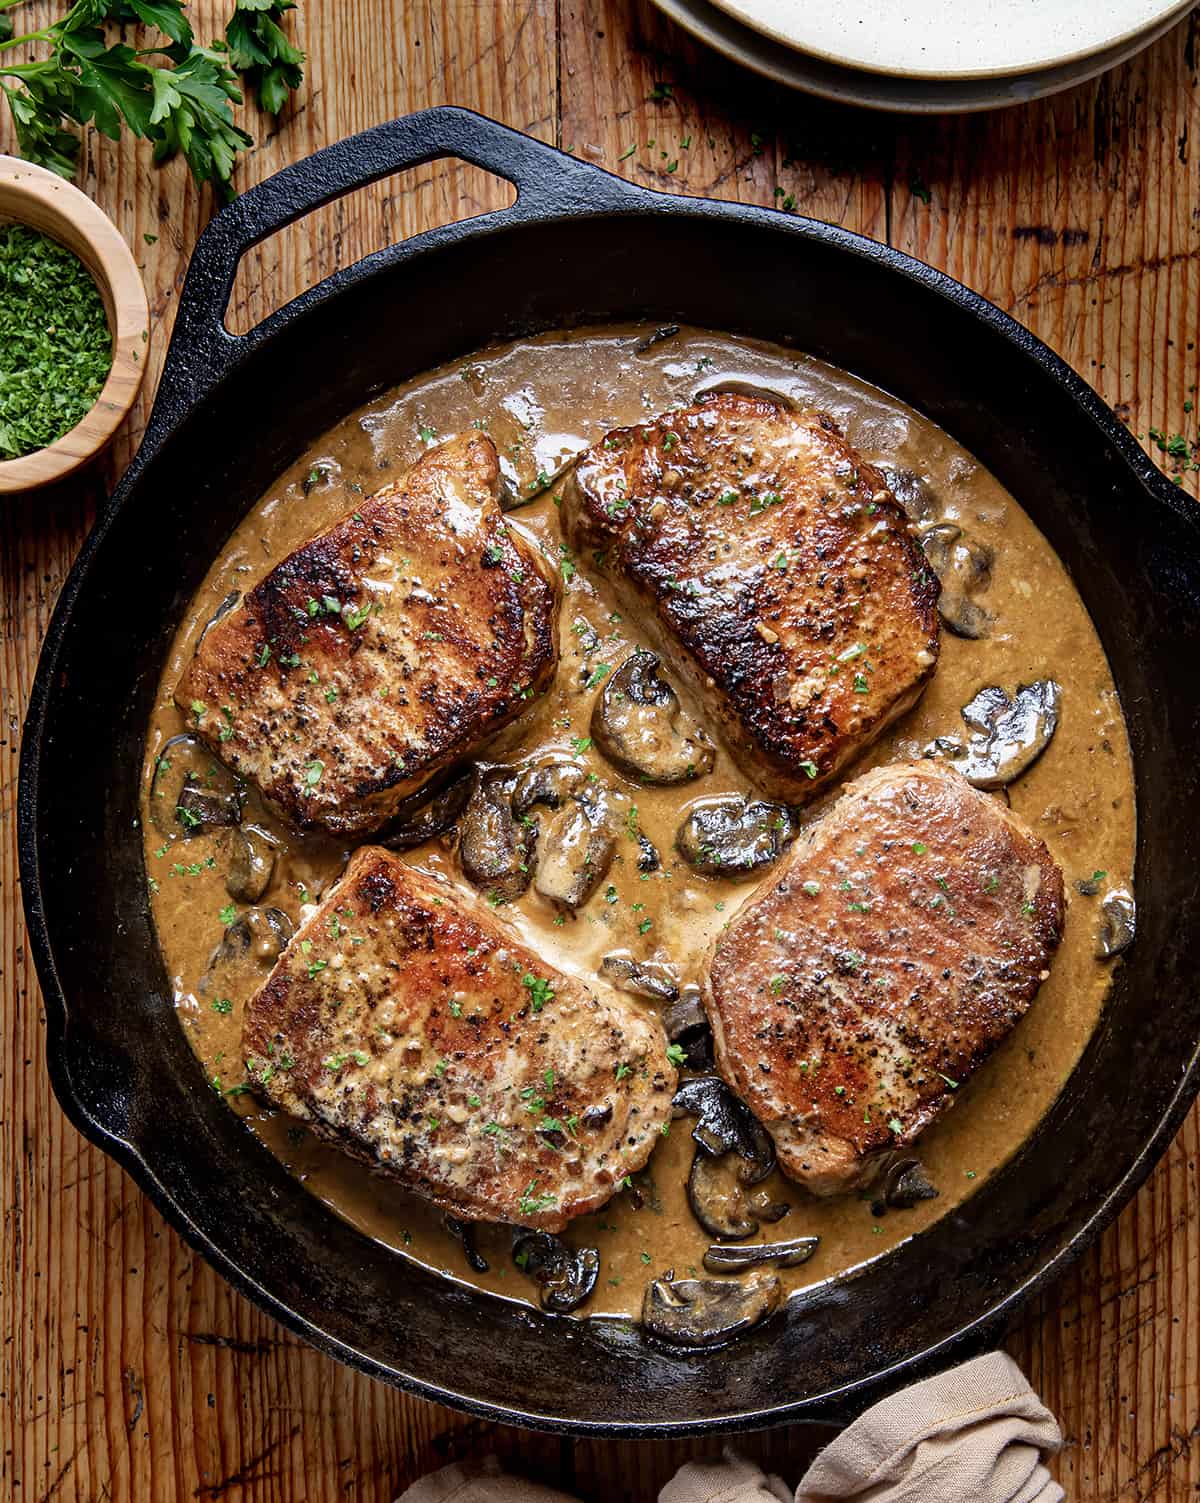 Creamy Mushroom Pork Chops in skillet on a wooden table from overhead.